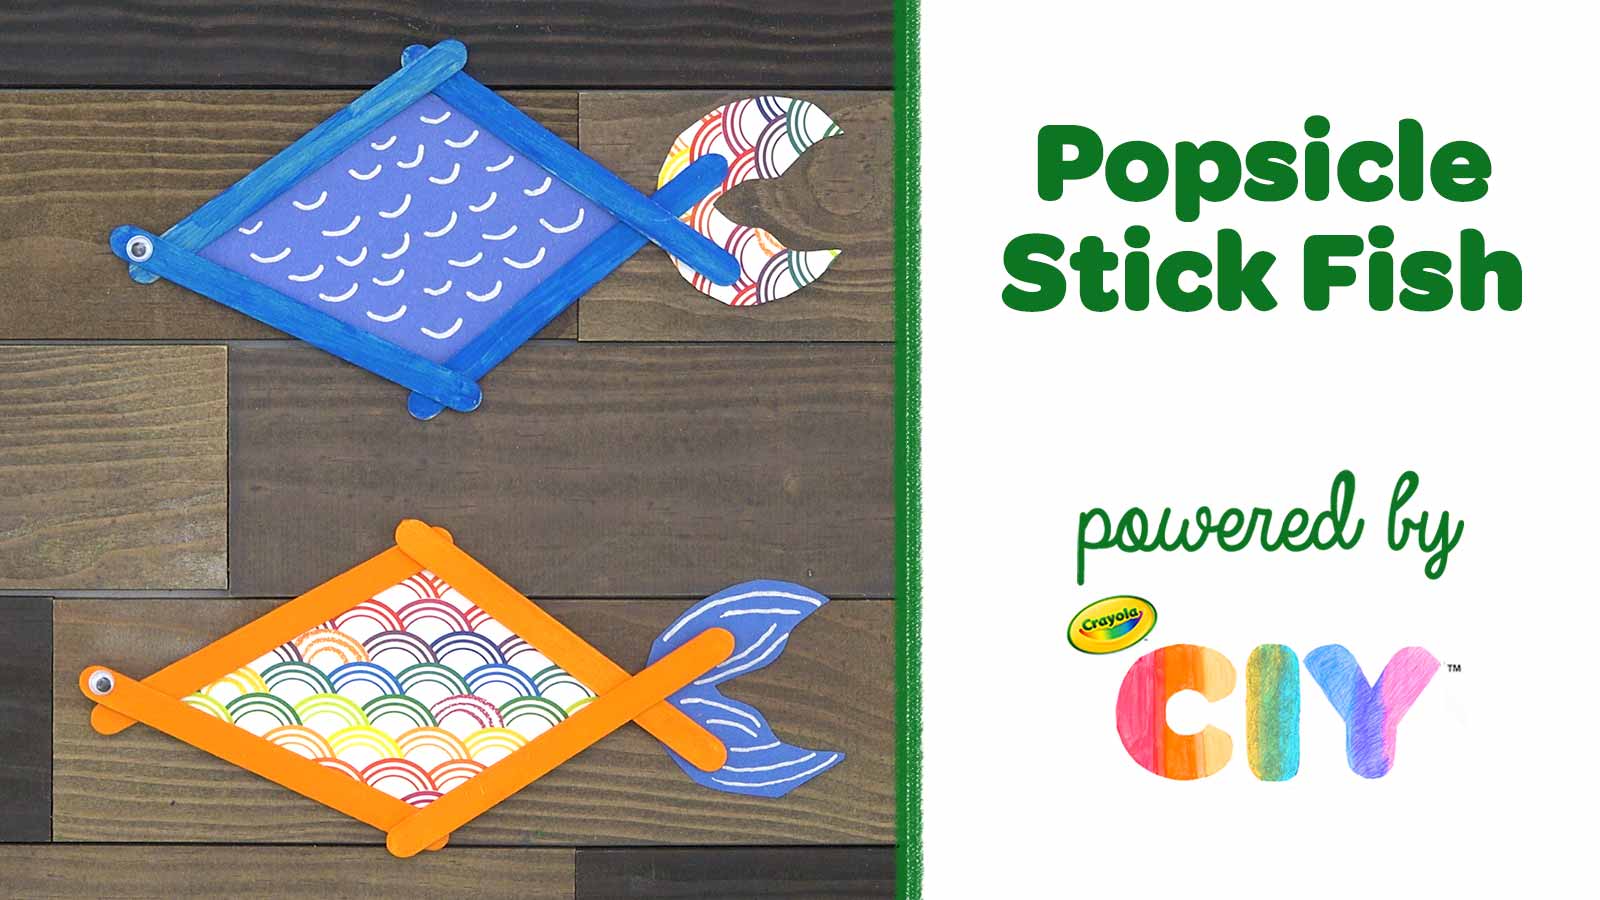 Popsicle Stick Fish Craft at Home, Crafts, , Crayola CIY, DIY  Crafts for Kids and Adults